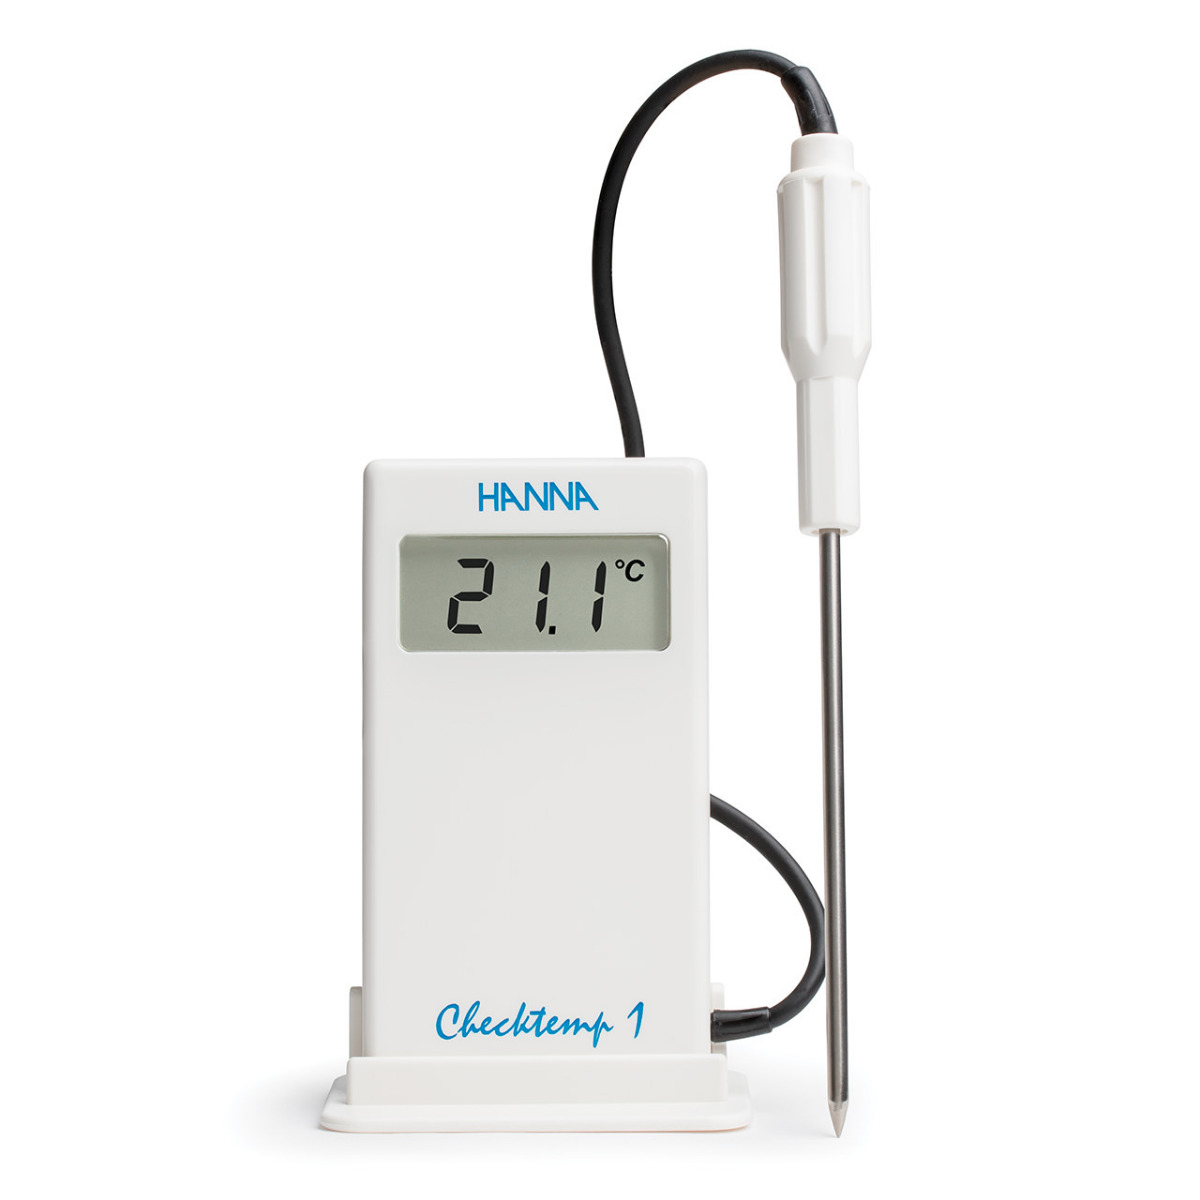 Checktemp® 1 Digital Thermometer with Stainless Steel Probe and 3.3’ silicone cable